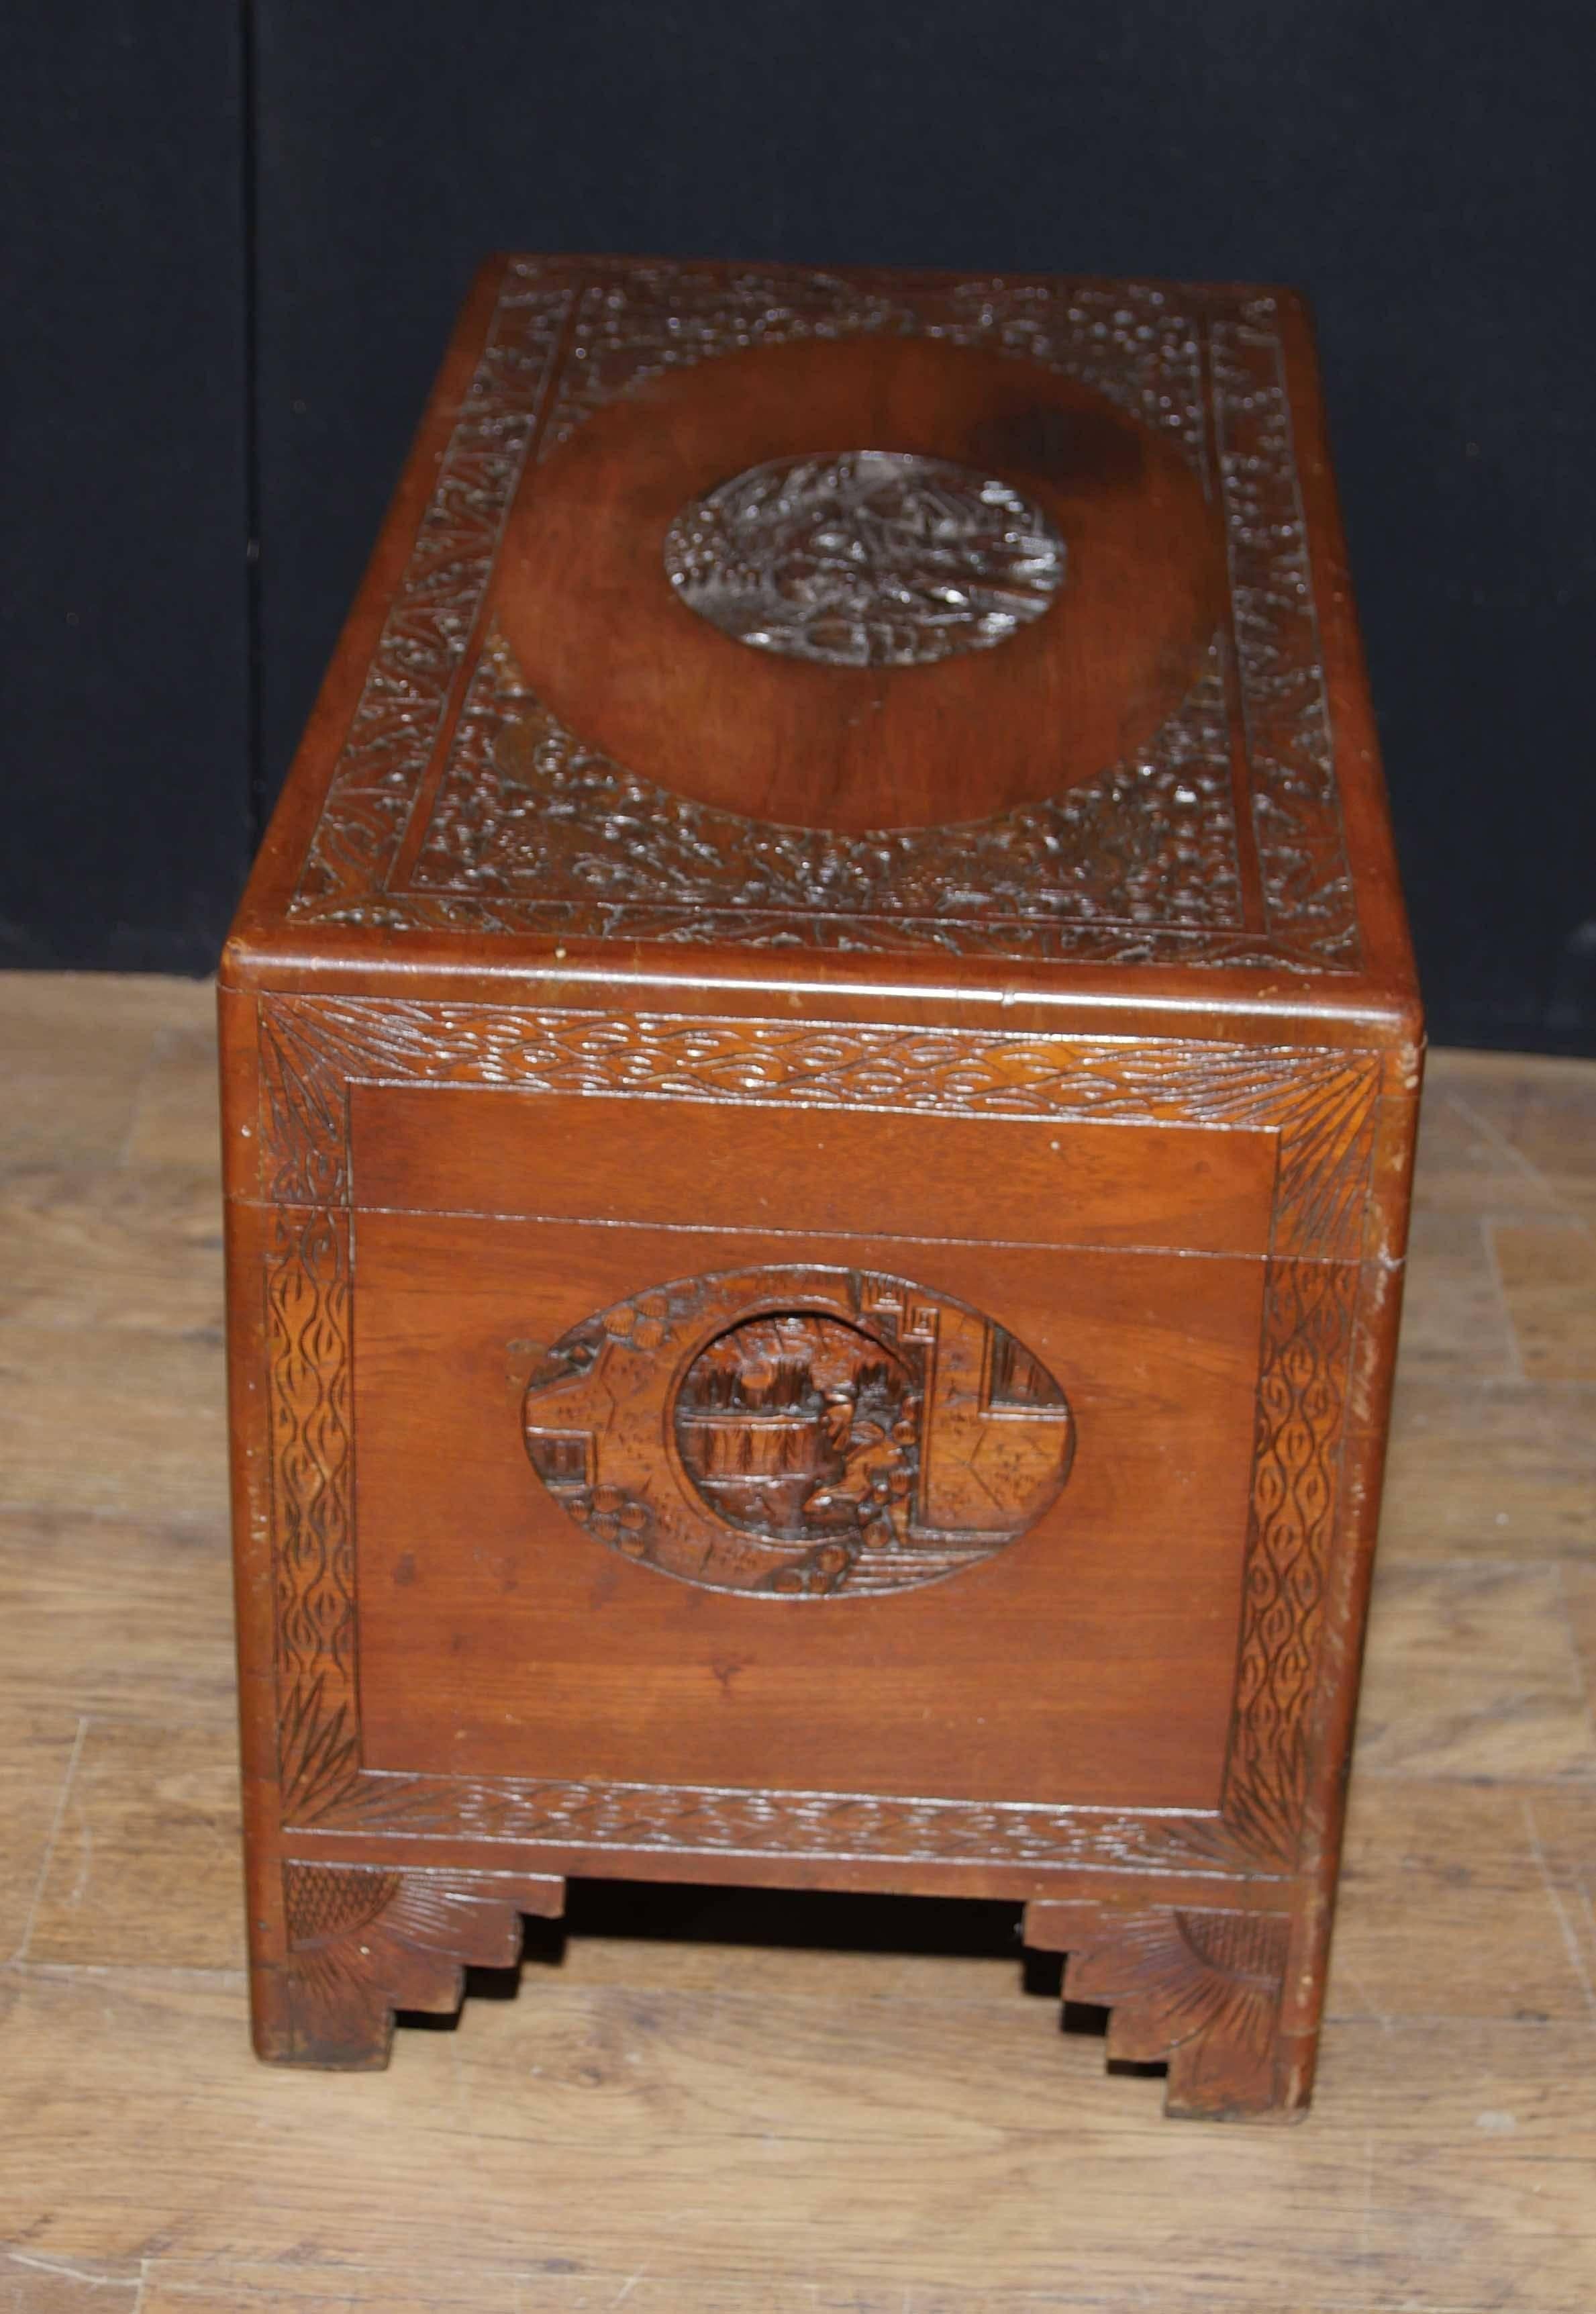 Gorgeous antique Chinese camphor wood luggage trunk or box.
Very intricately cast, very well crafted.
These chests were frequently brought back by sailors from the far east during the early 20th century.
Mostly found in british sea port towns